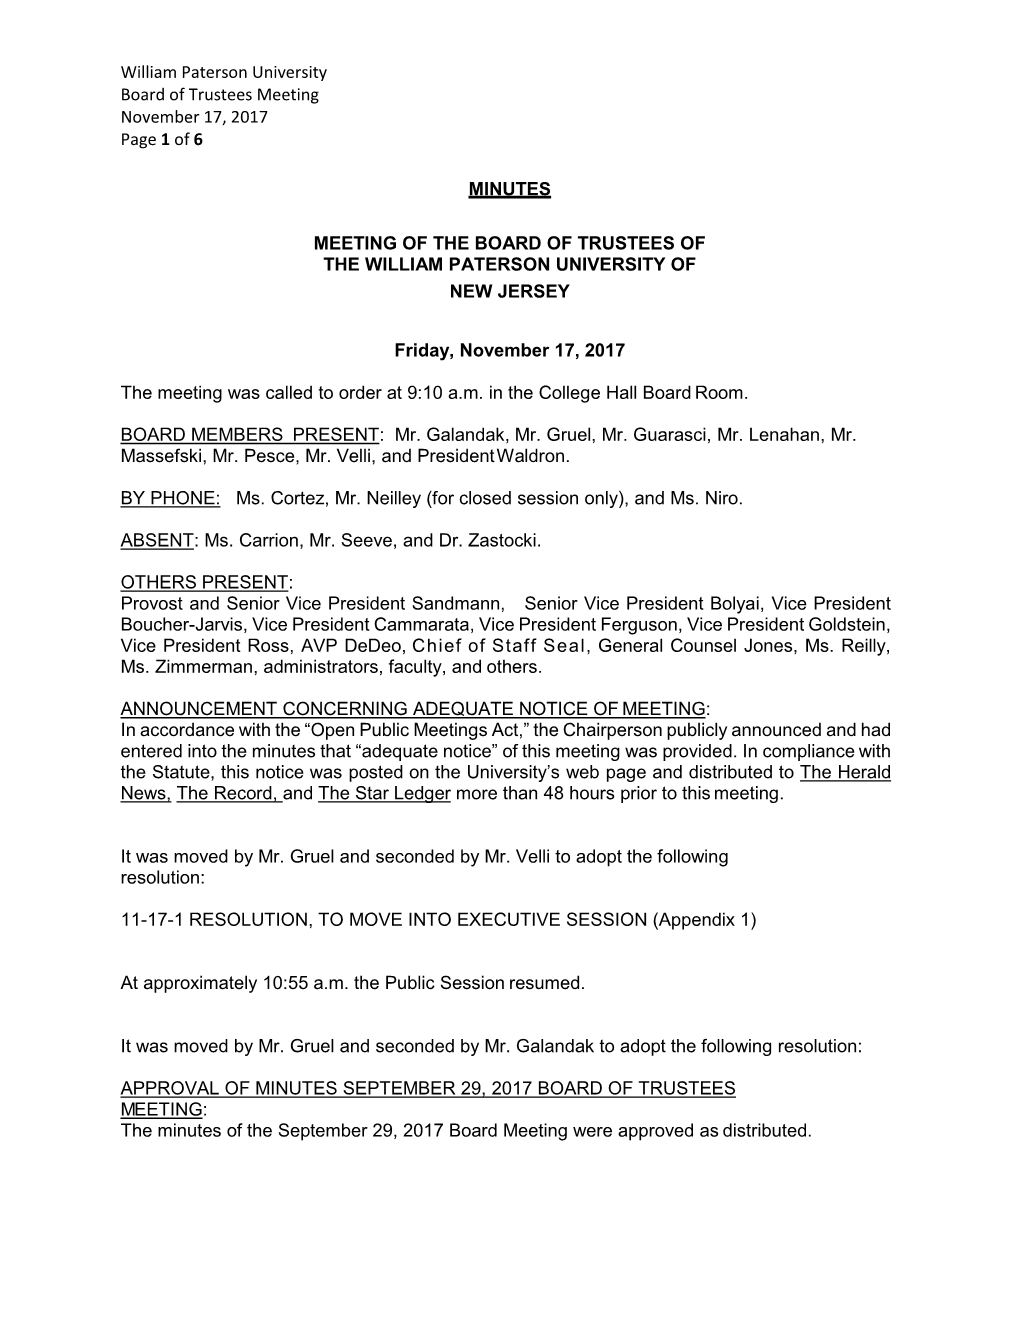 William Paterson University Board of Trustees Meeting November 17, 2017 Page 1 of 6 MINUTES MEETING of the BOARD of TRUSTEES OF